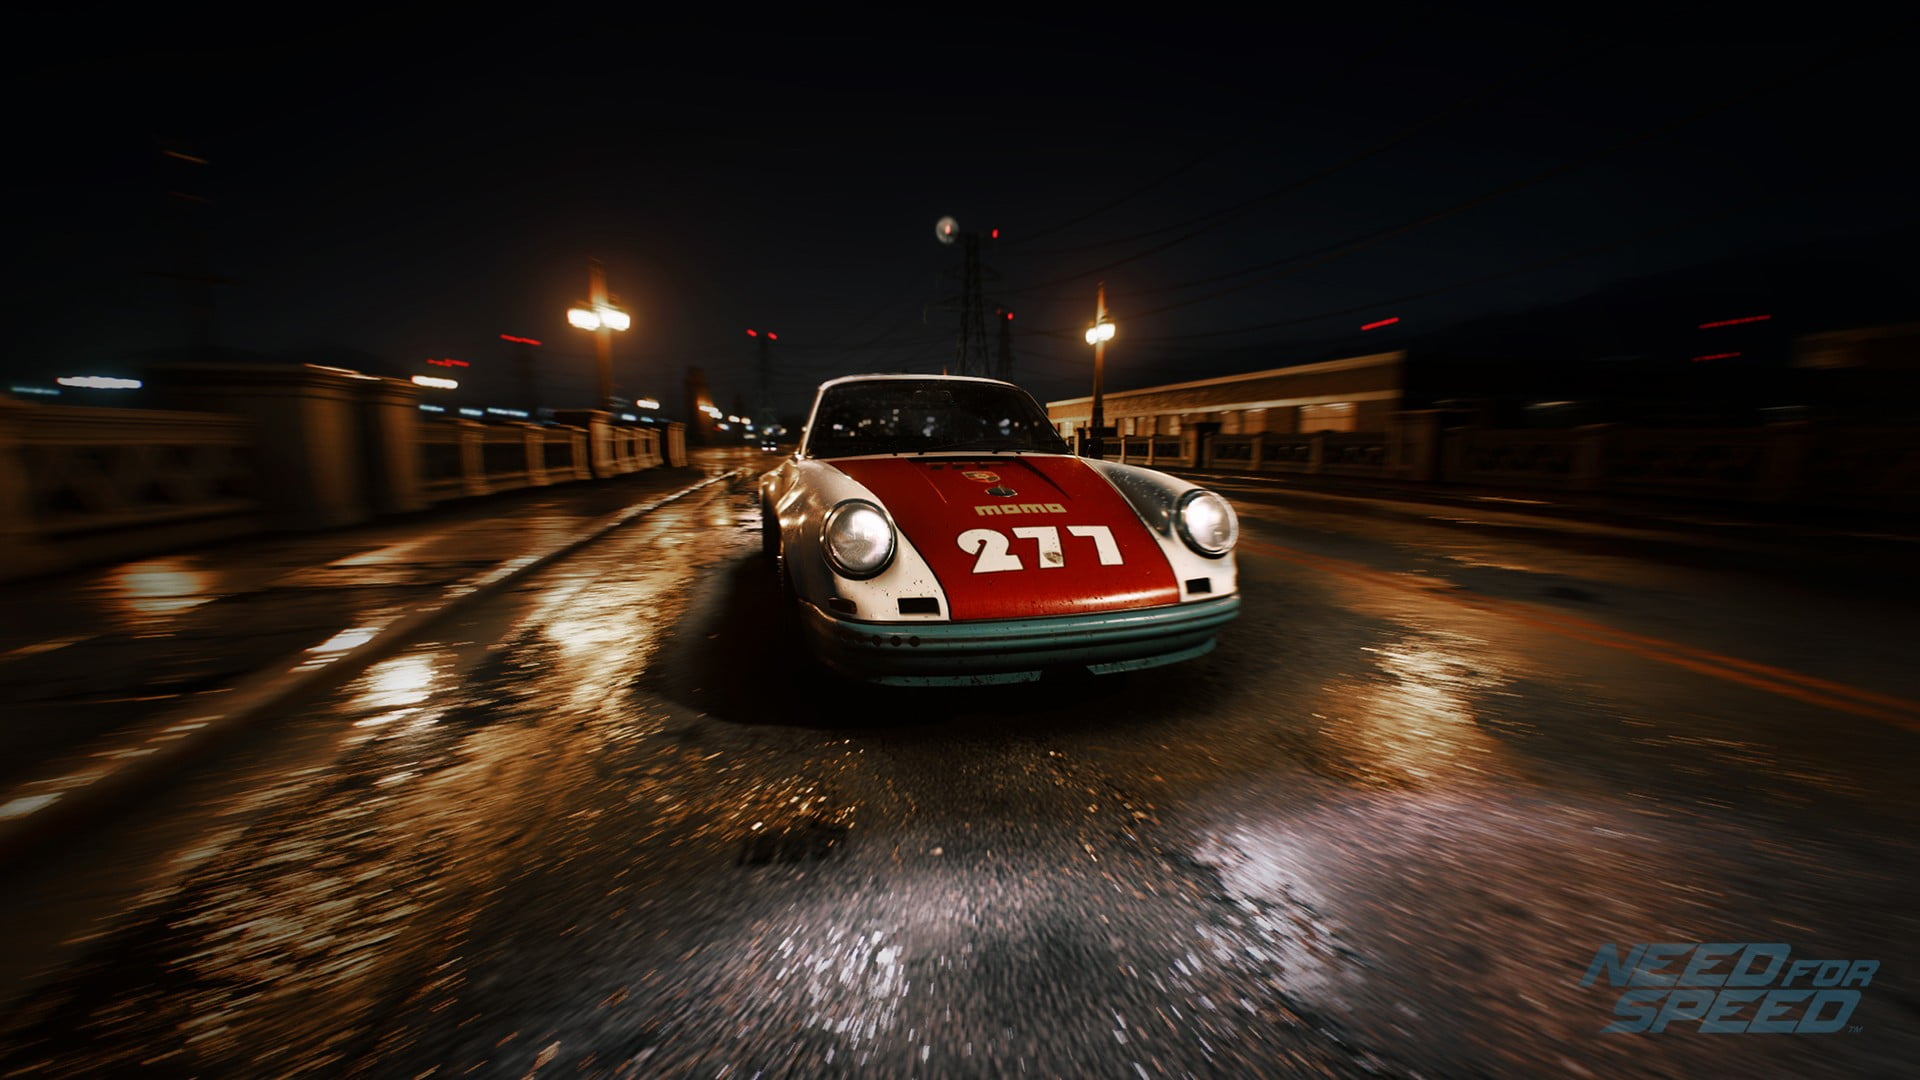 Need for Speed graphic wallpaper, Need for Speed, 2015, video games, Magnus Walker